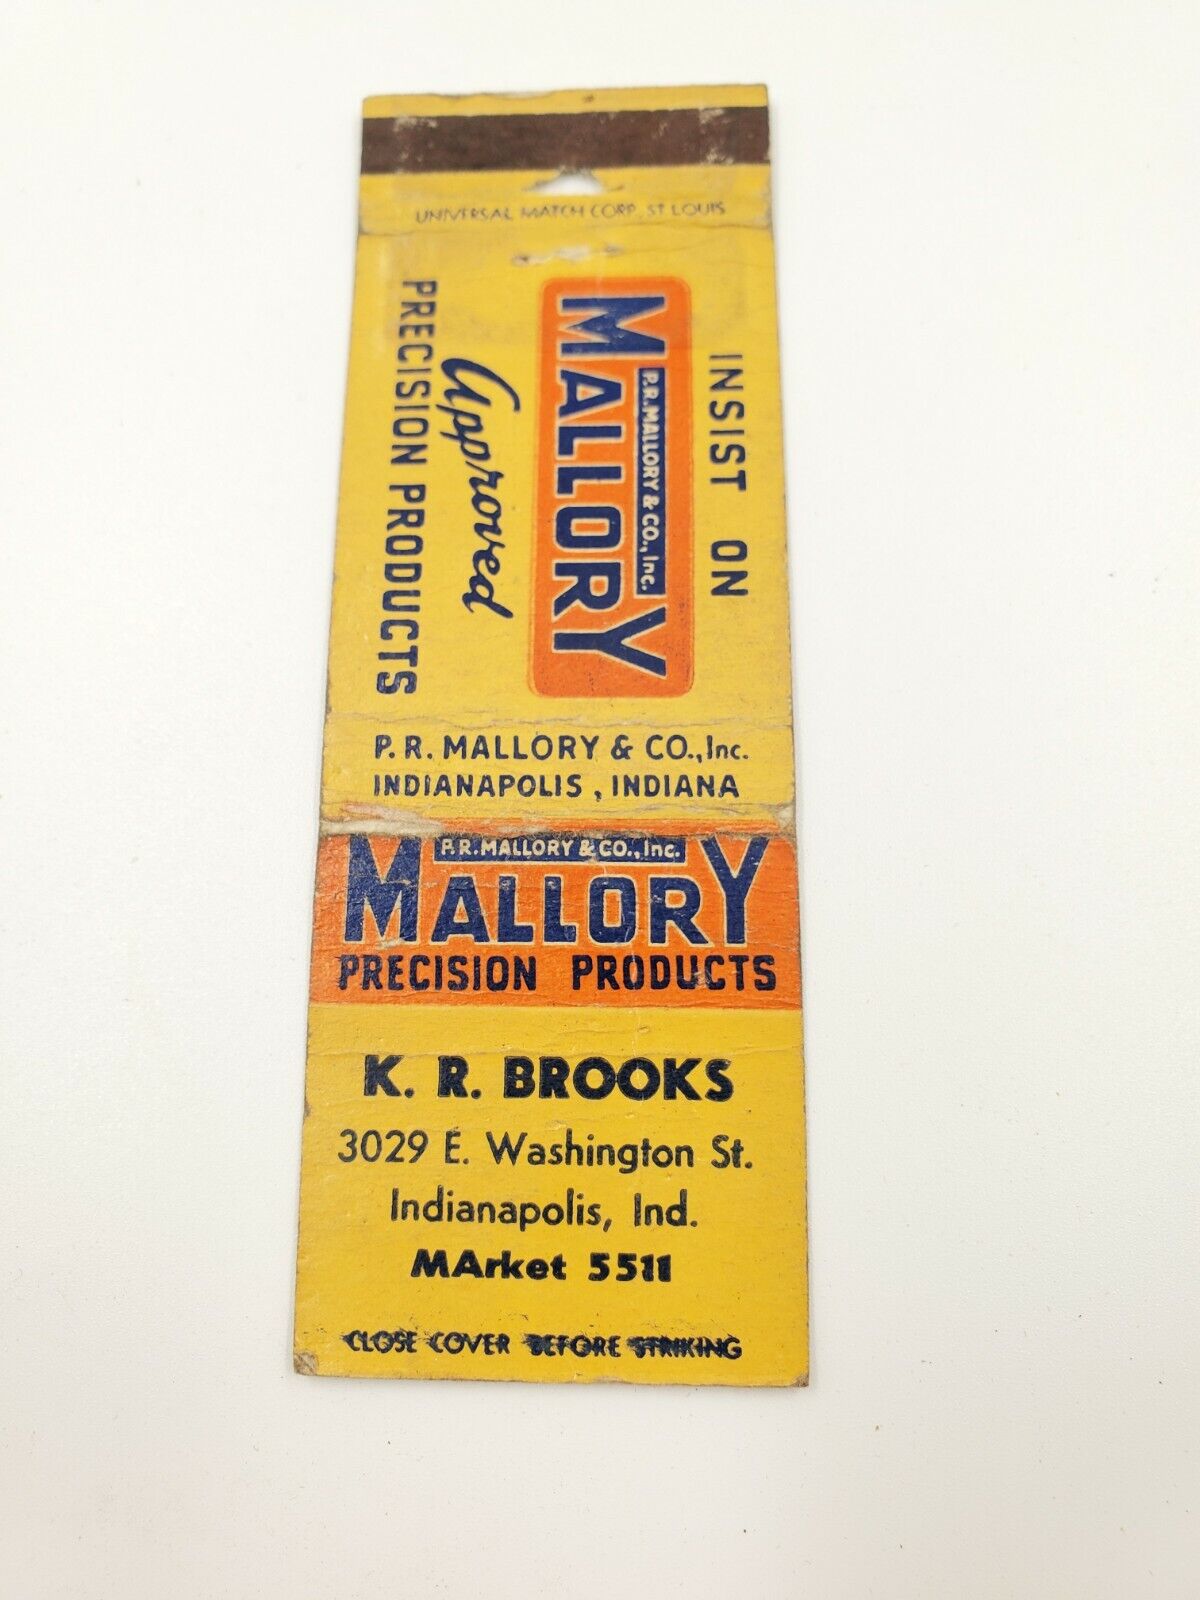 Mallory Precision Products K R Brooks Indianapolis Indiana Matchbook Cover